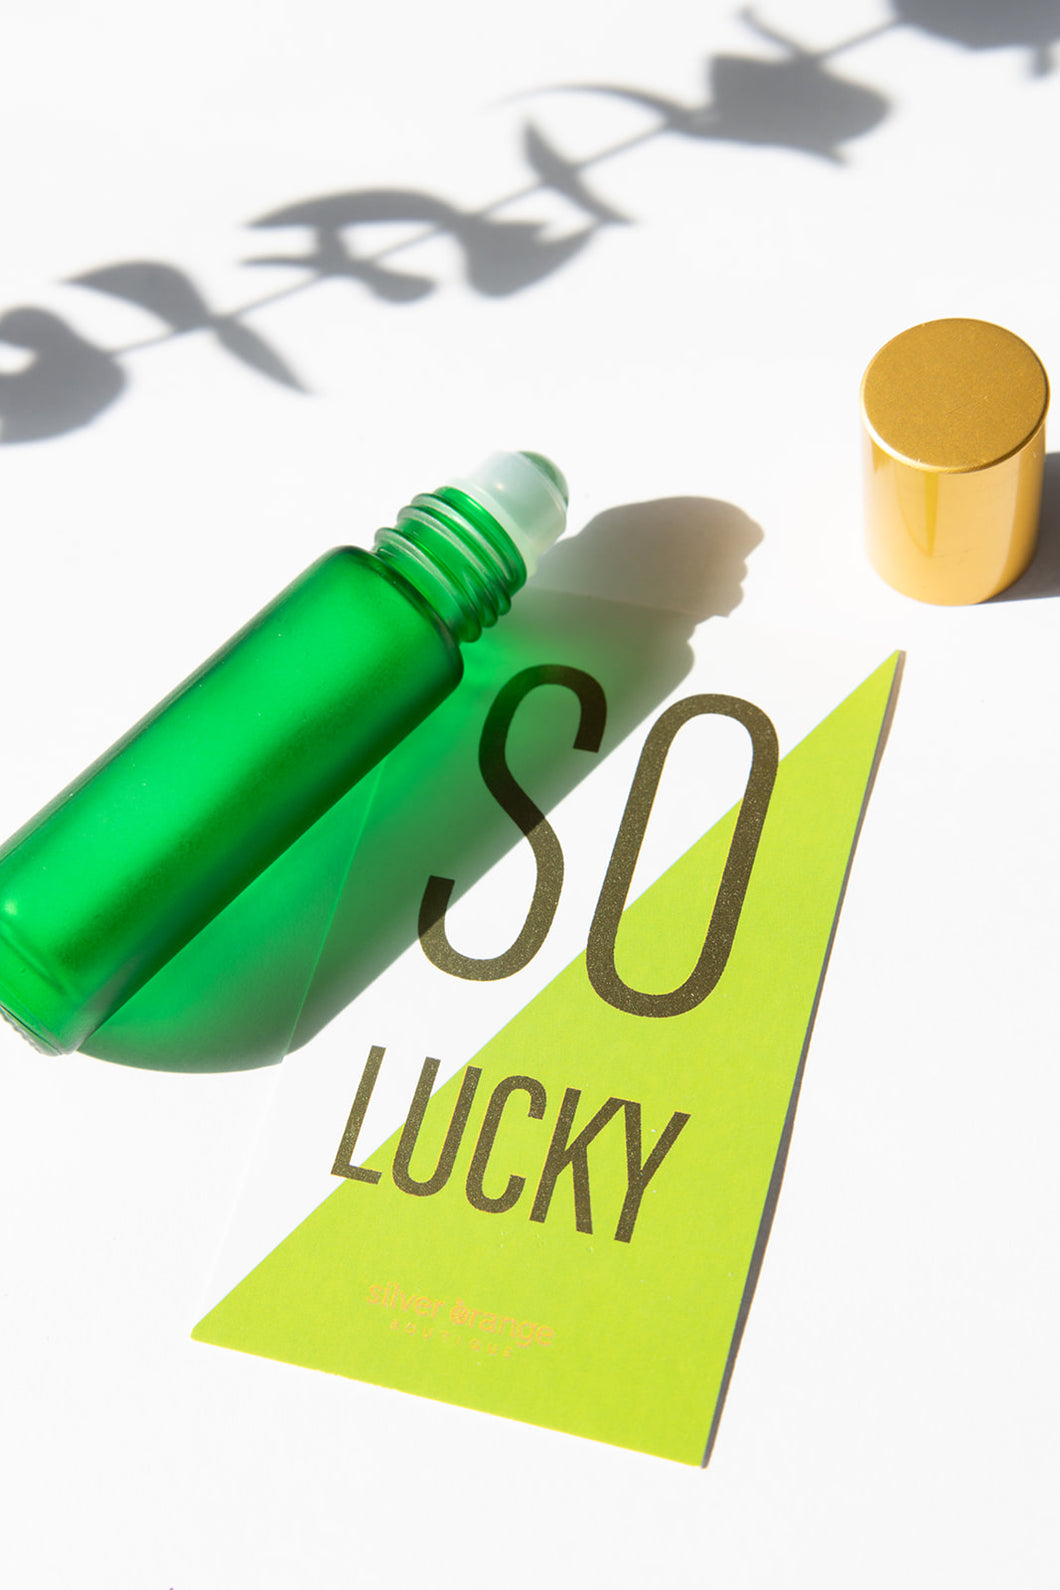 SO LUCKY Green bottle with green aventurine rollerball